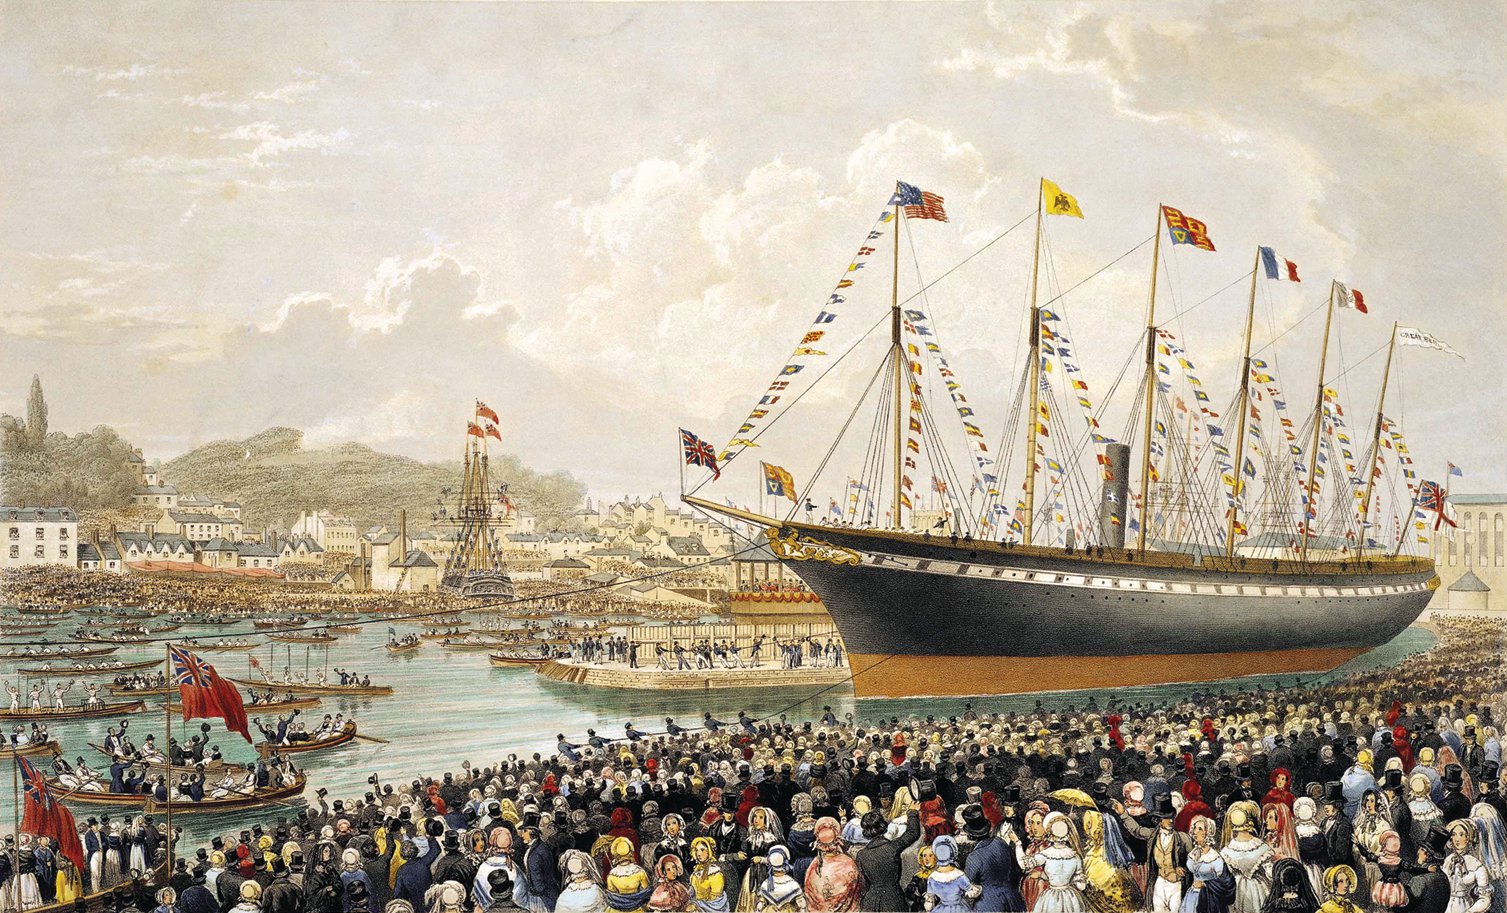 A crowd of people watch a large black and red ship with one funnel and six masts adorned with flags